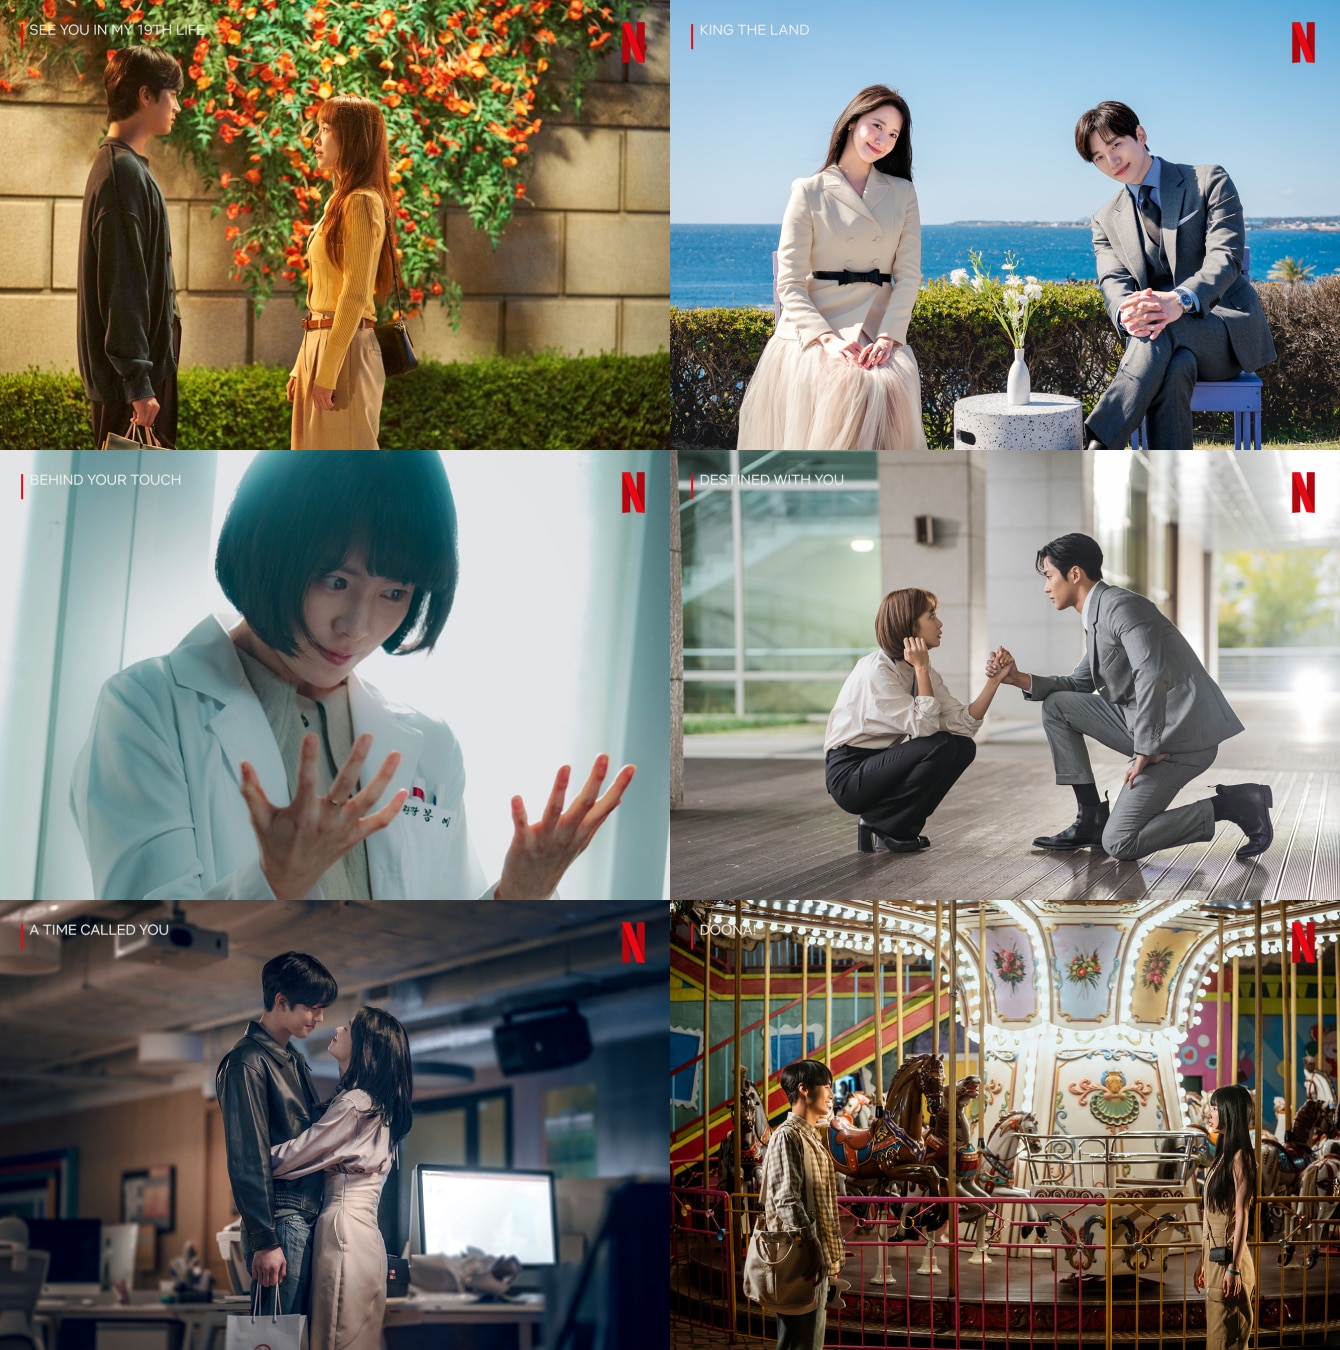  Streaming giant Netflix is set to premiere six new romantic K-dramas in the coming months. Photos courtesy of Netflix